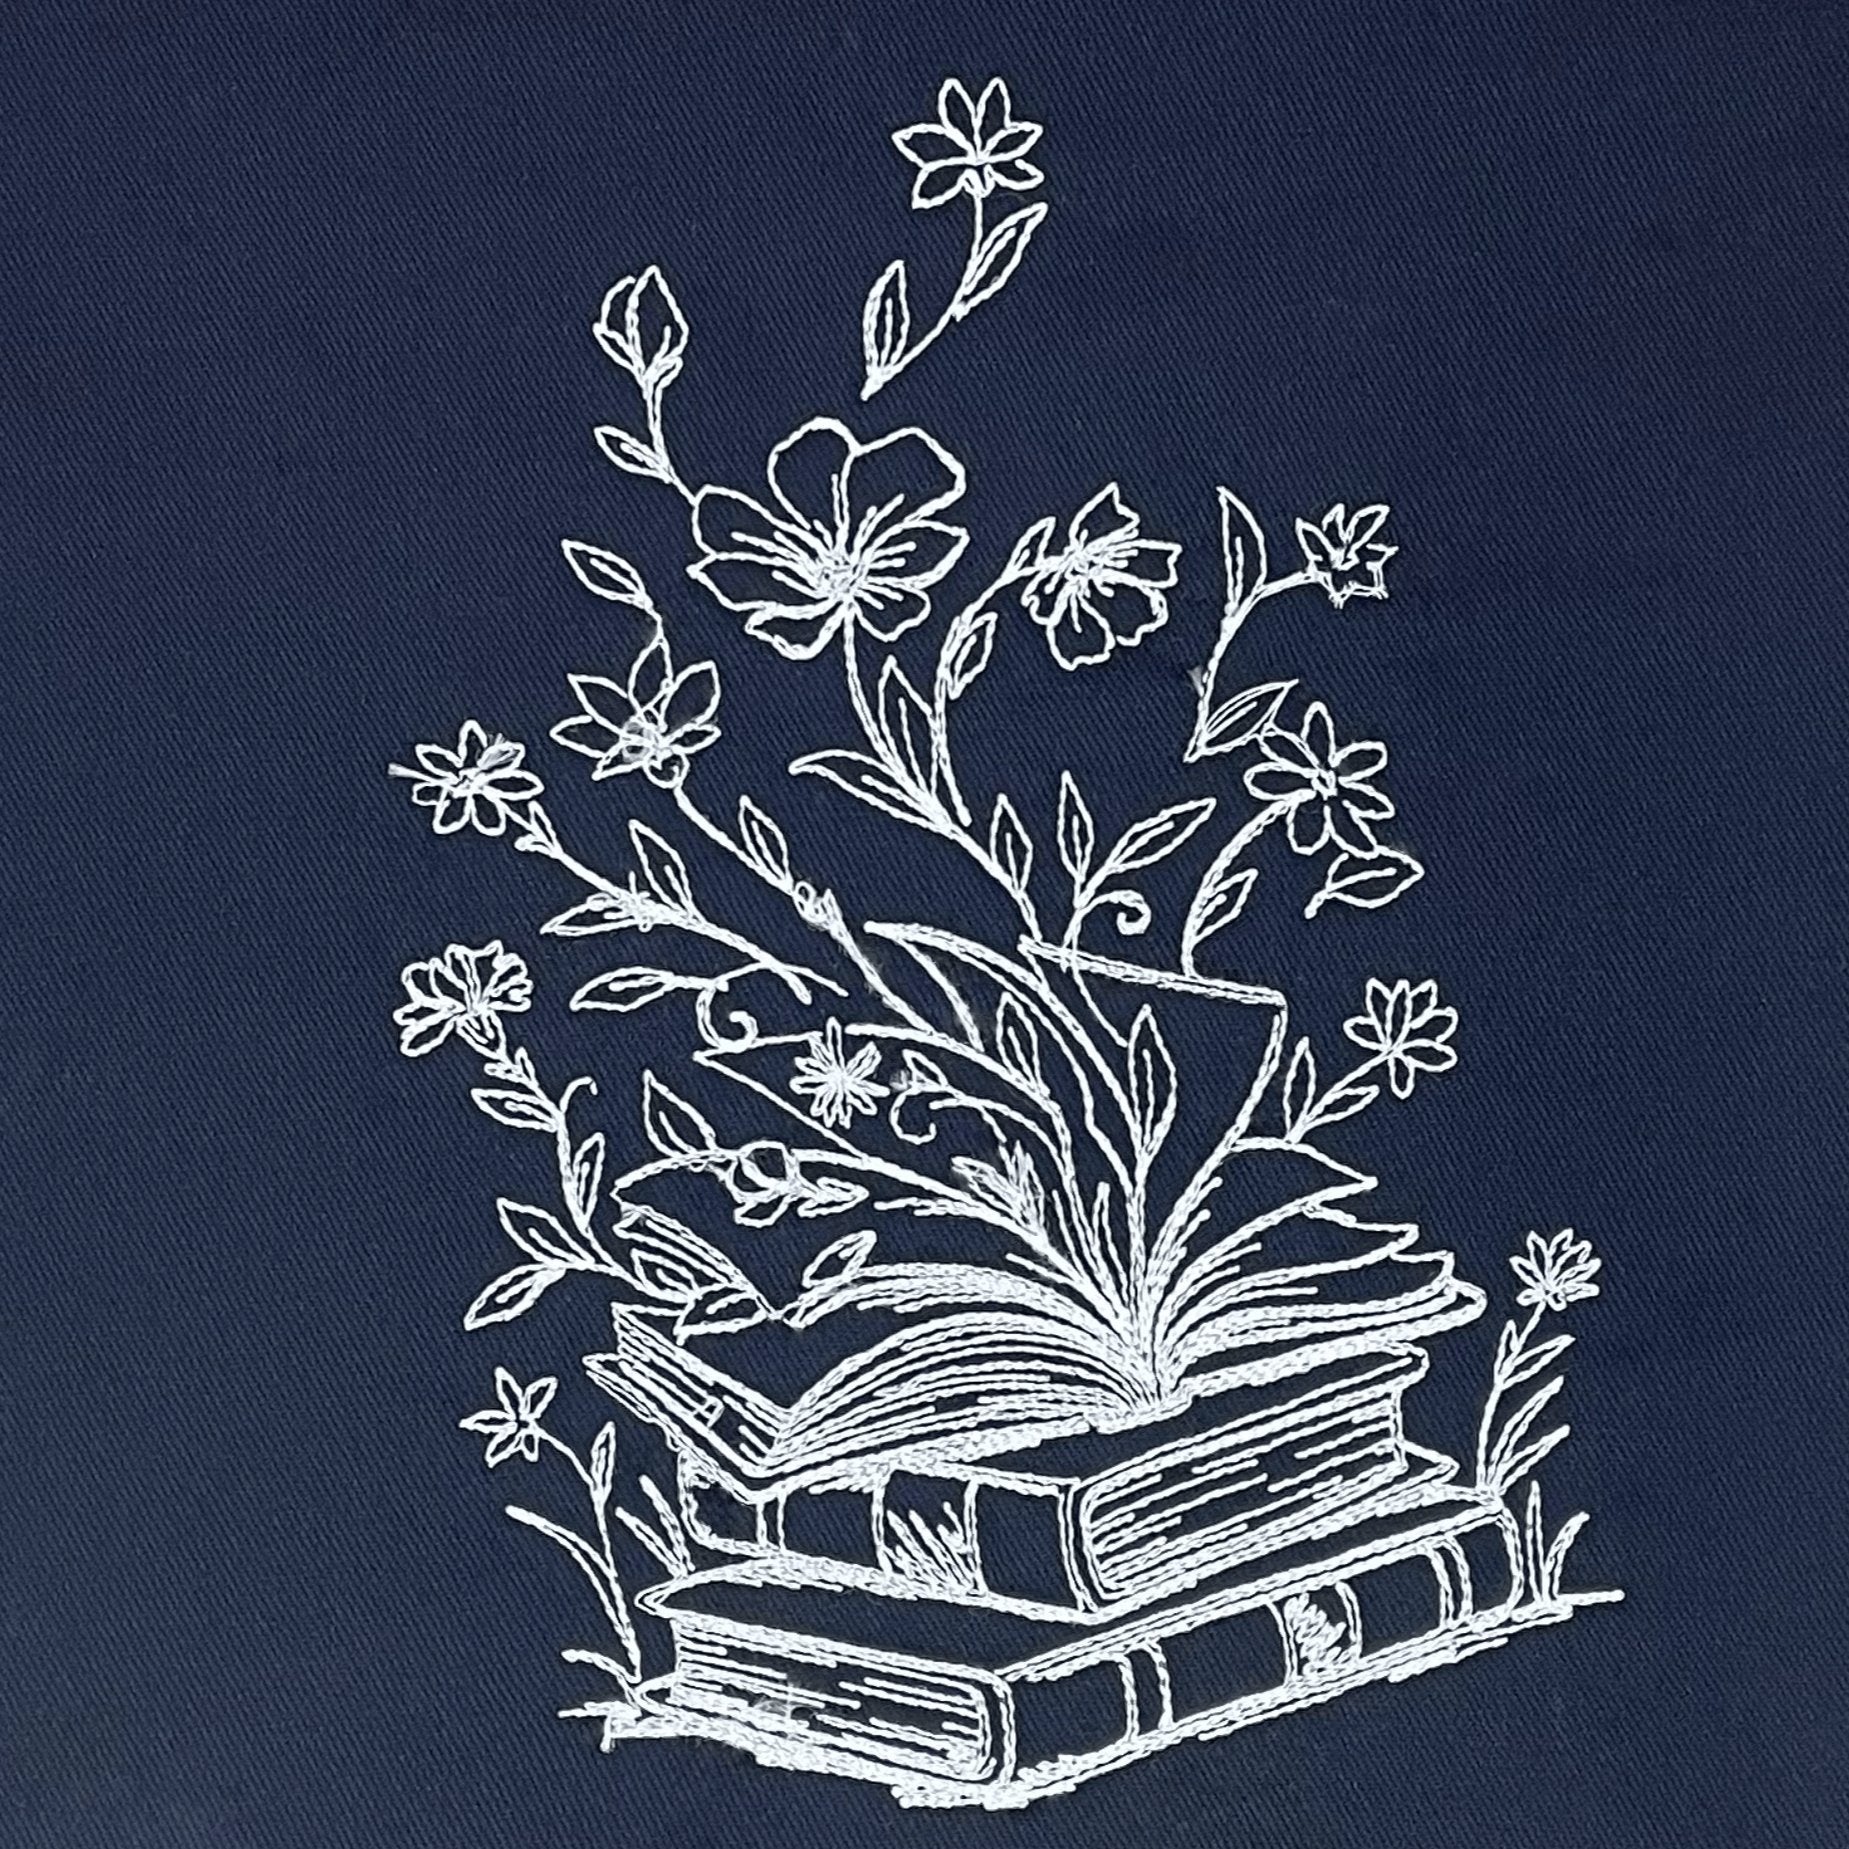 Embroidered Books & Flowers Book Hug - Lost Minds Clothing